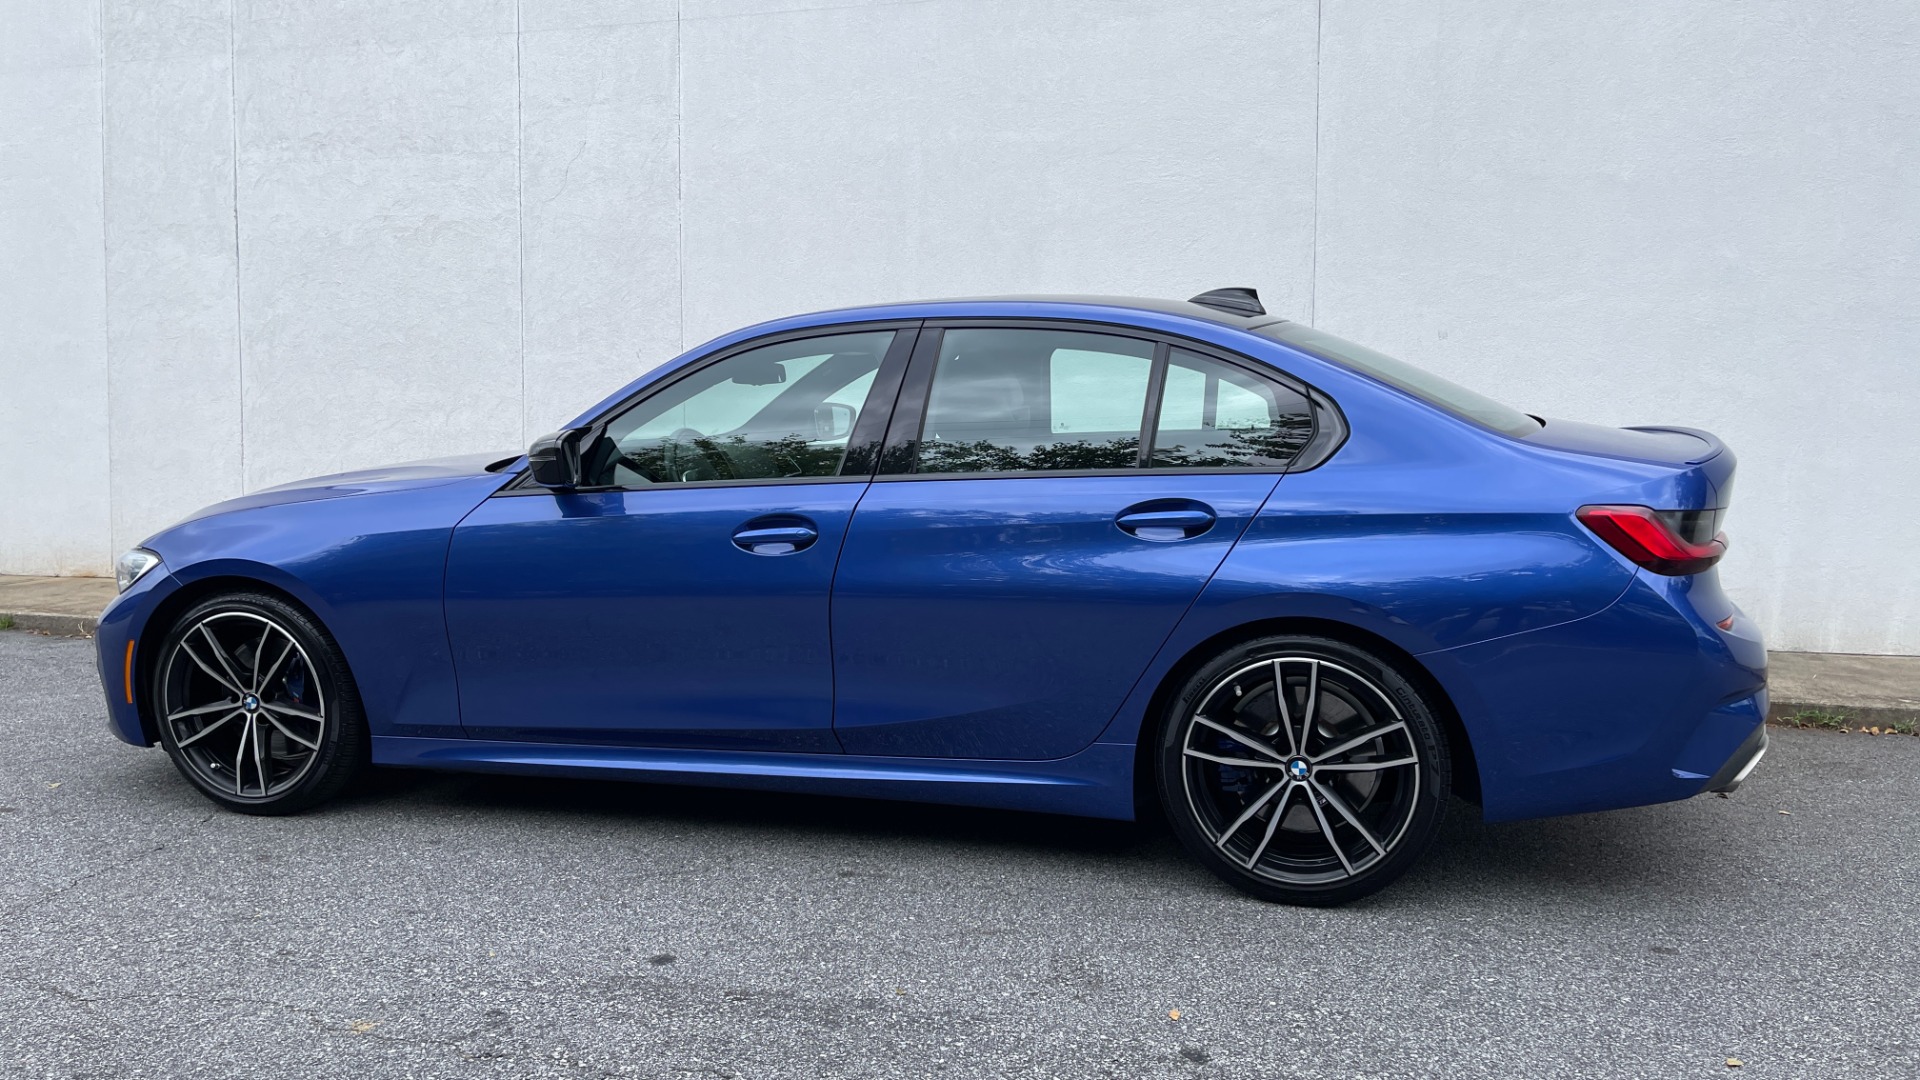 Used 2021 BMW 3 Series M340i / REMOTE START / DRIVING ASSISTANCE / 19IN WHEELS / INTAKE SYSTEM for sale $52,995 at Formula Imports in Charlotte NC 28227 6